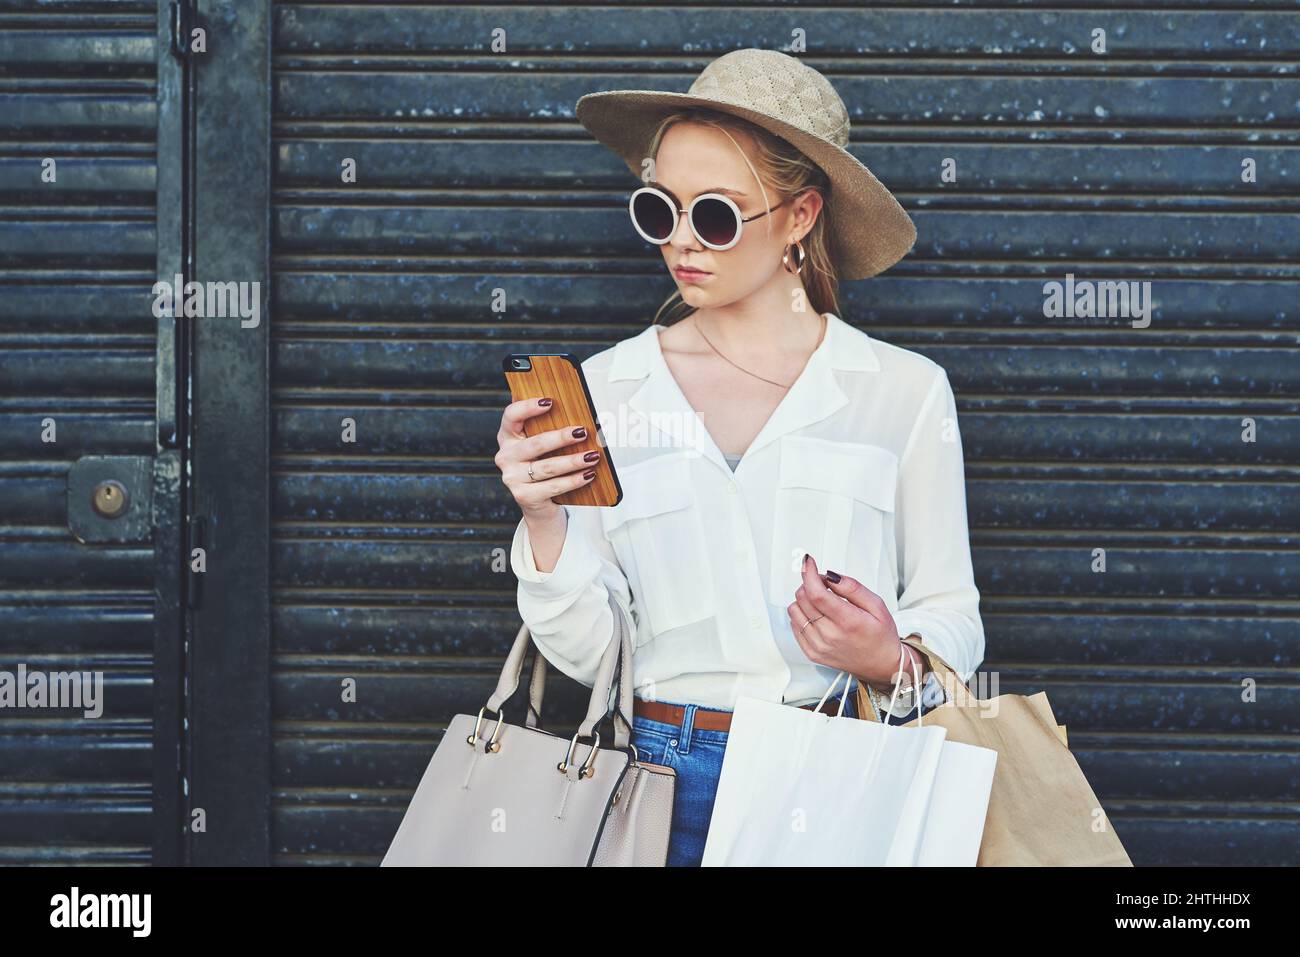 https://c8.alamy.com/comp/2HTHHDX/her-friends-have-to-hear-about-todays-deals-cropped-shot-of-an-attractive-young-woman-using-a-smartphone-while-holding-shopping-bags-against-an-urban-2HTHHDX.jpg